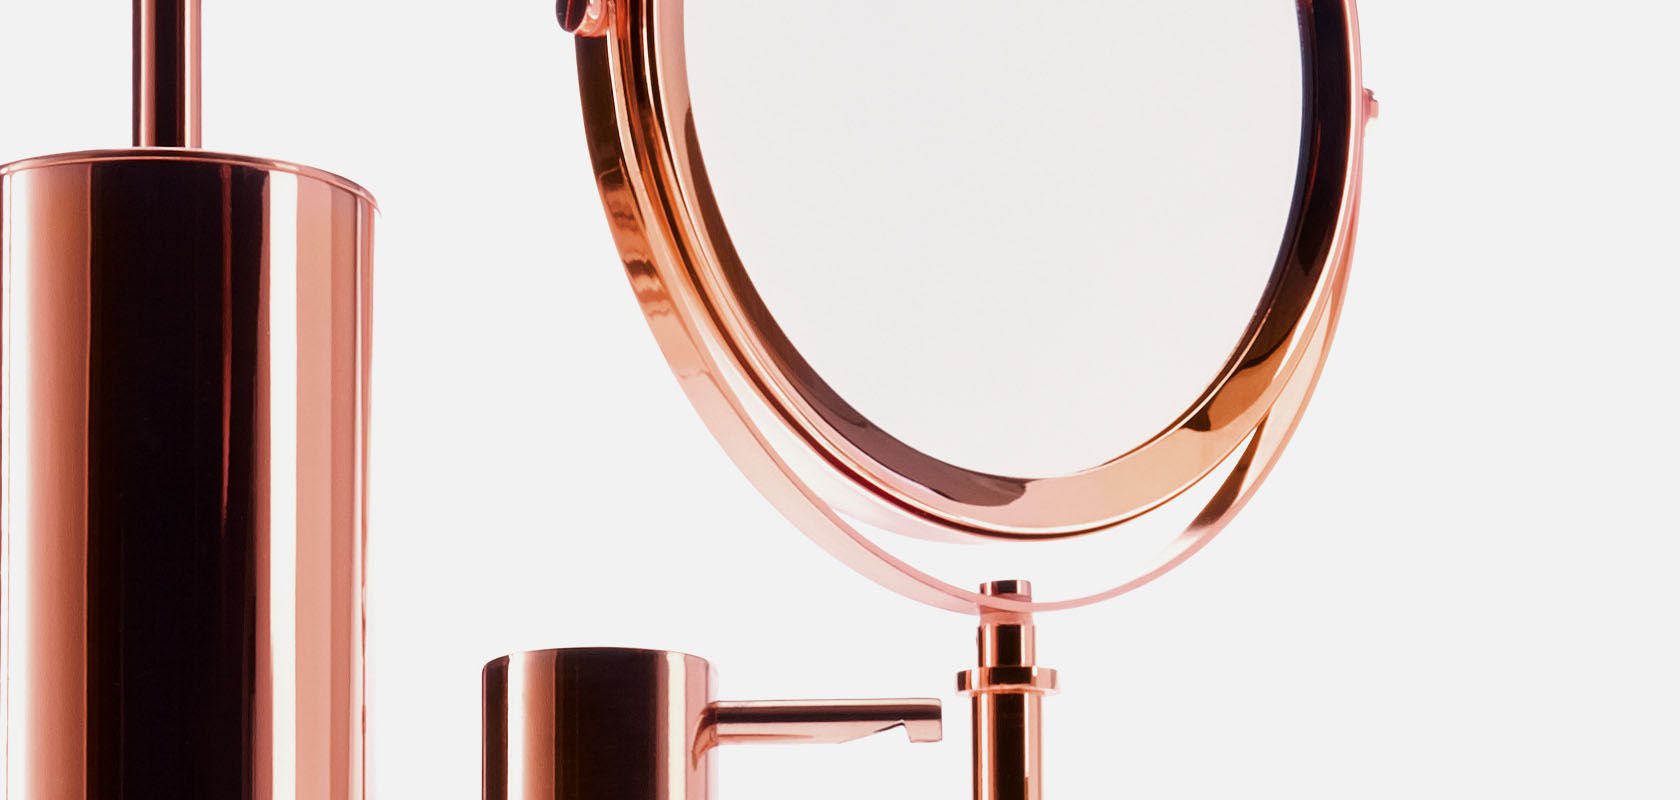 Rose Gold Wall Mounted Tumbler Holder by Decor Walther - |VESIMI Design| Luxury Bathrooms and Home Decor